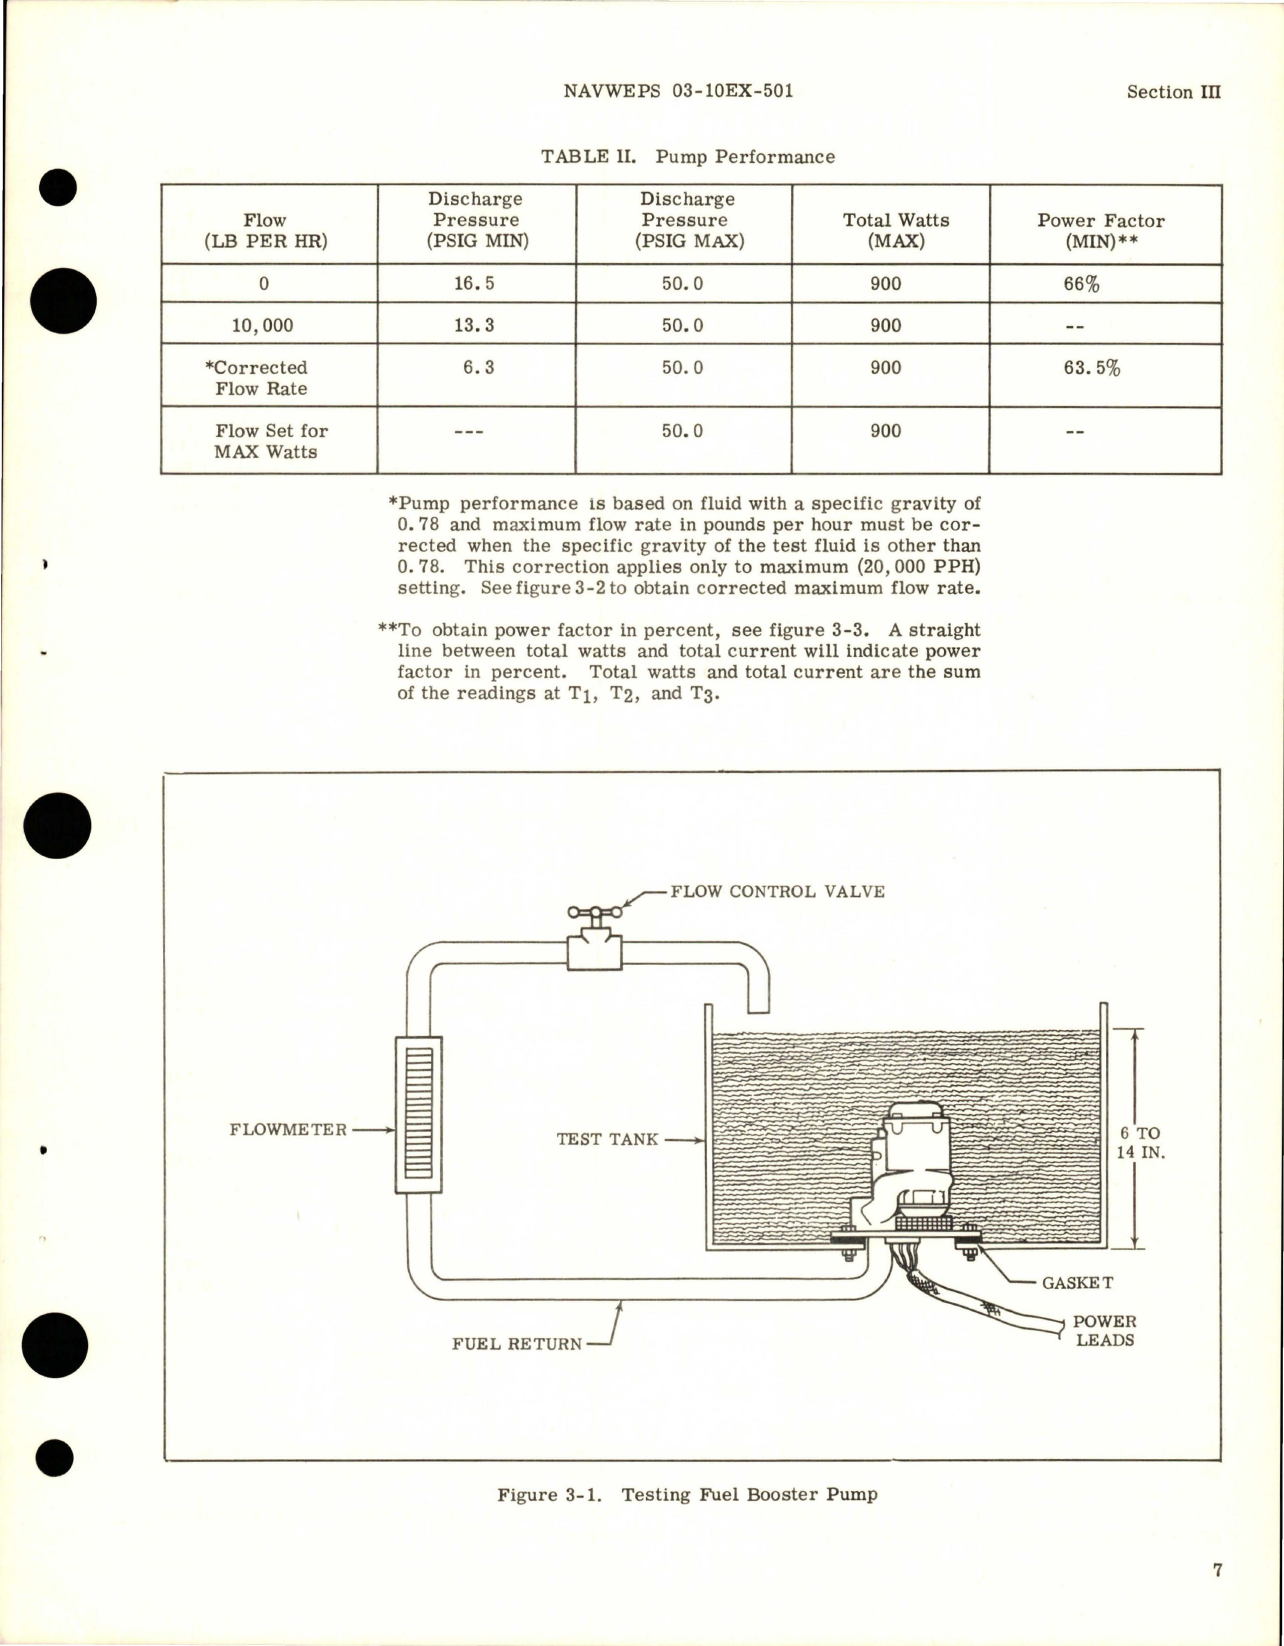 Sample page 9 from AirCorps Library document: Overhaul Instructions for Fuel Booster Pump